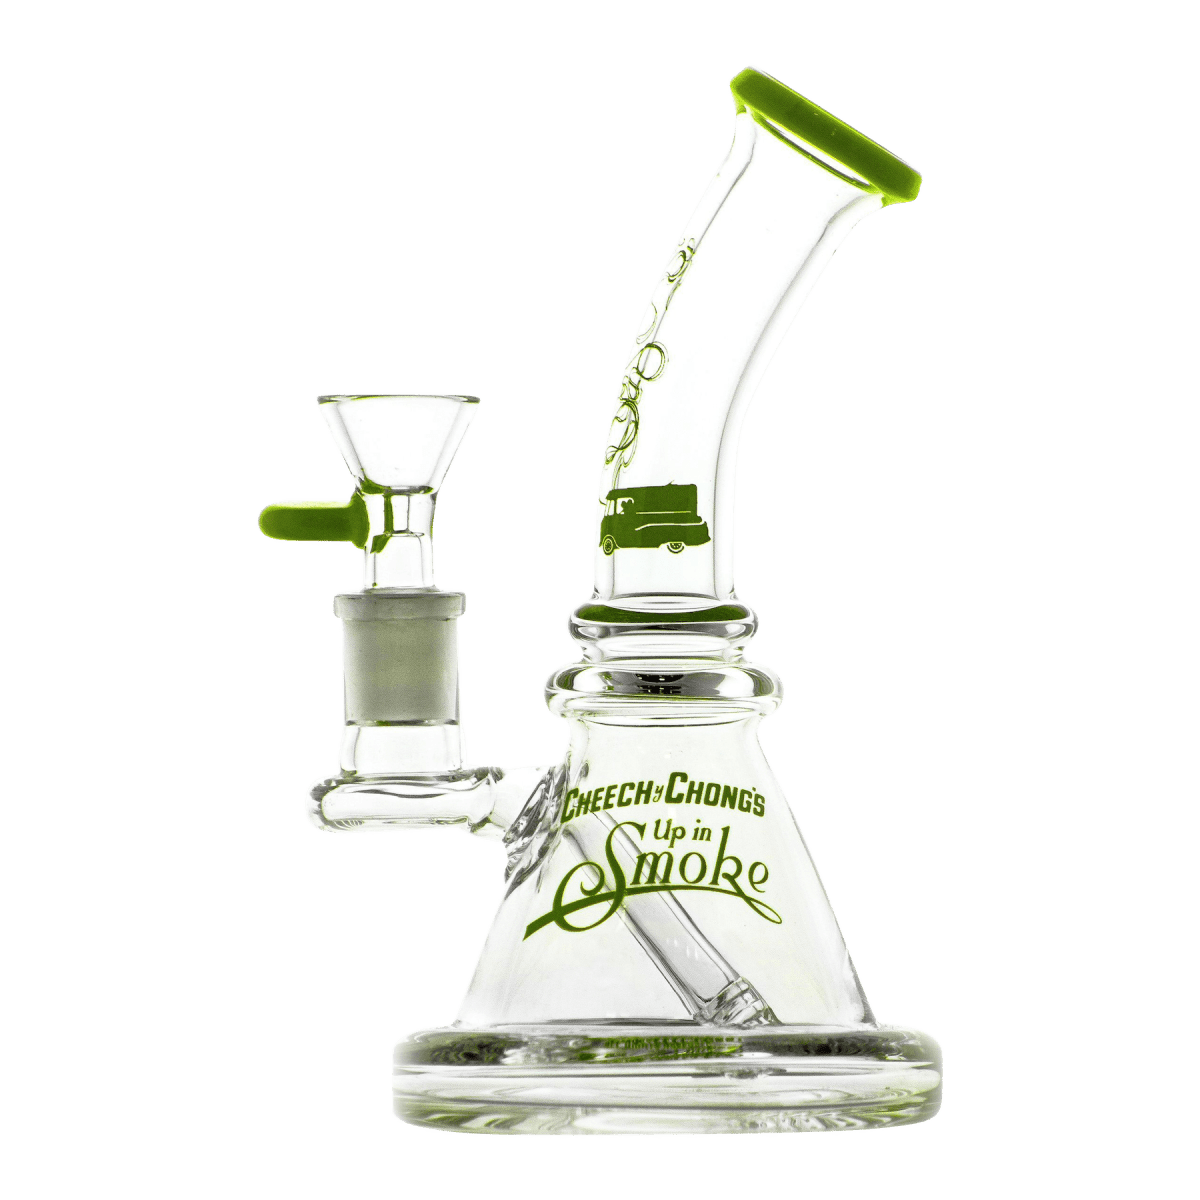 Cheech and Chong Up In Smoke Bong Apple Green Strawberry 7" Water Pipe